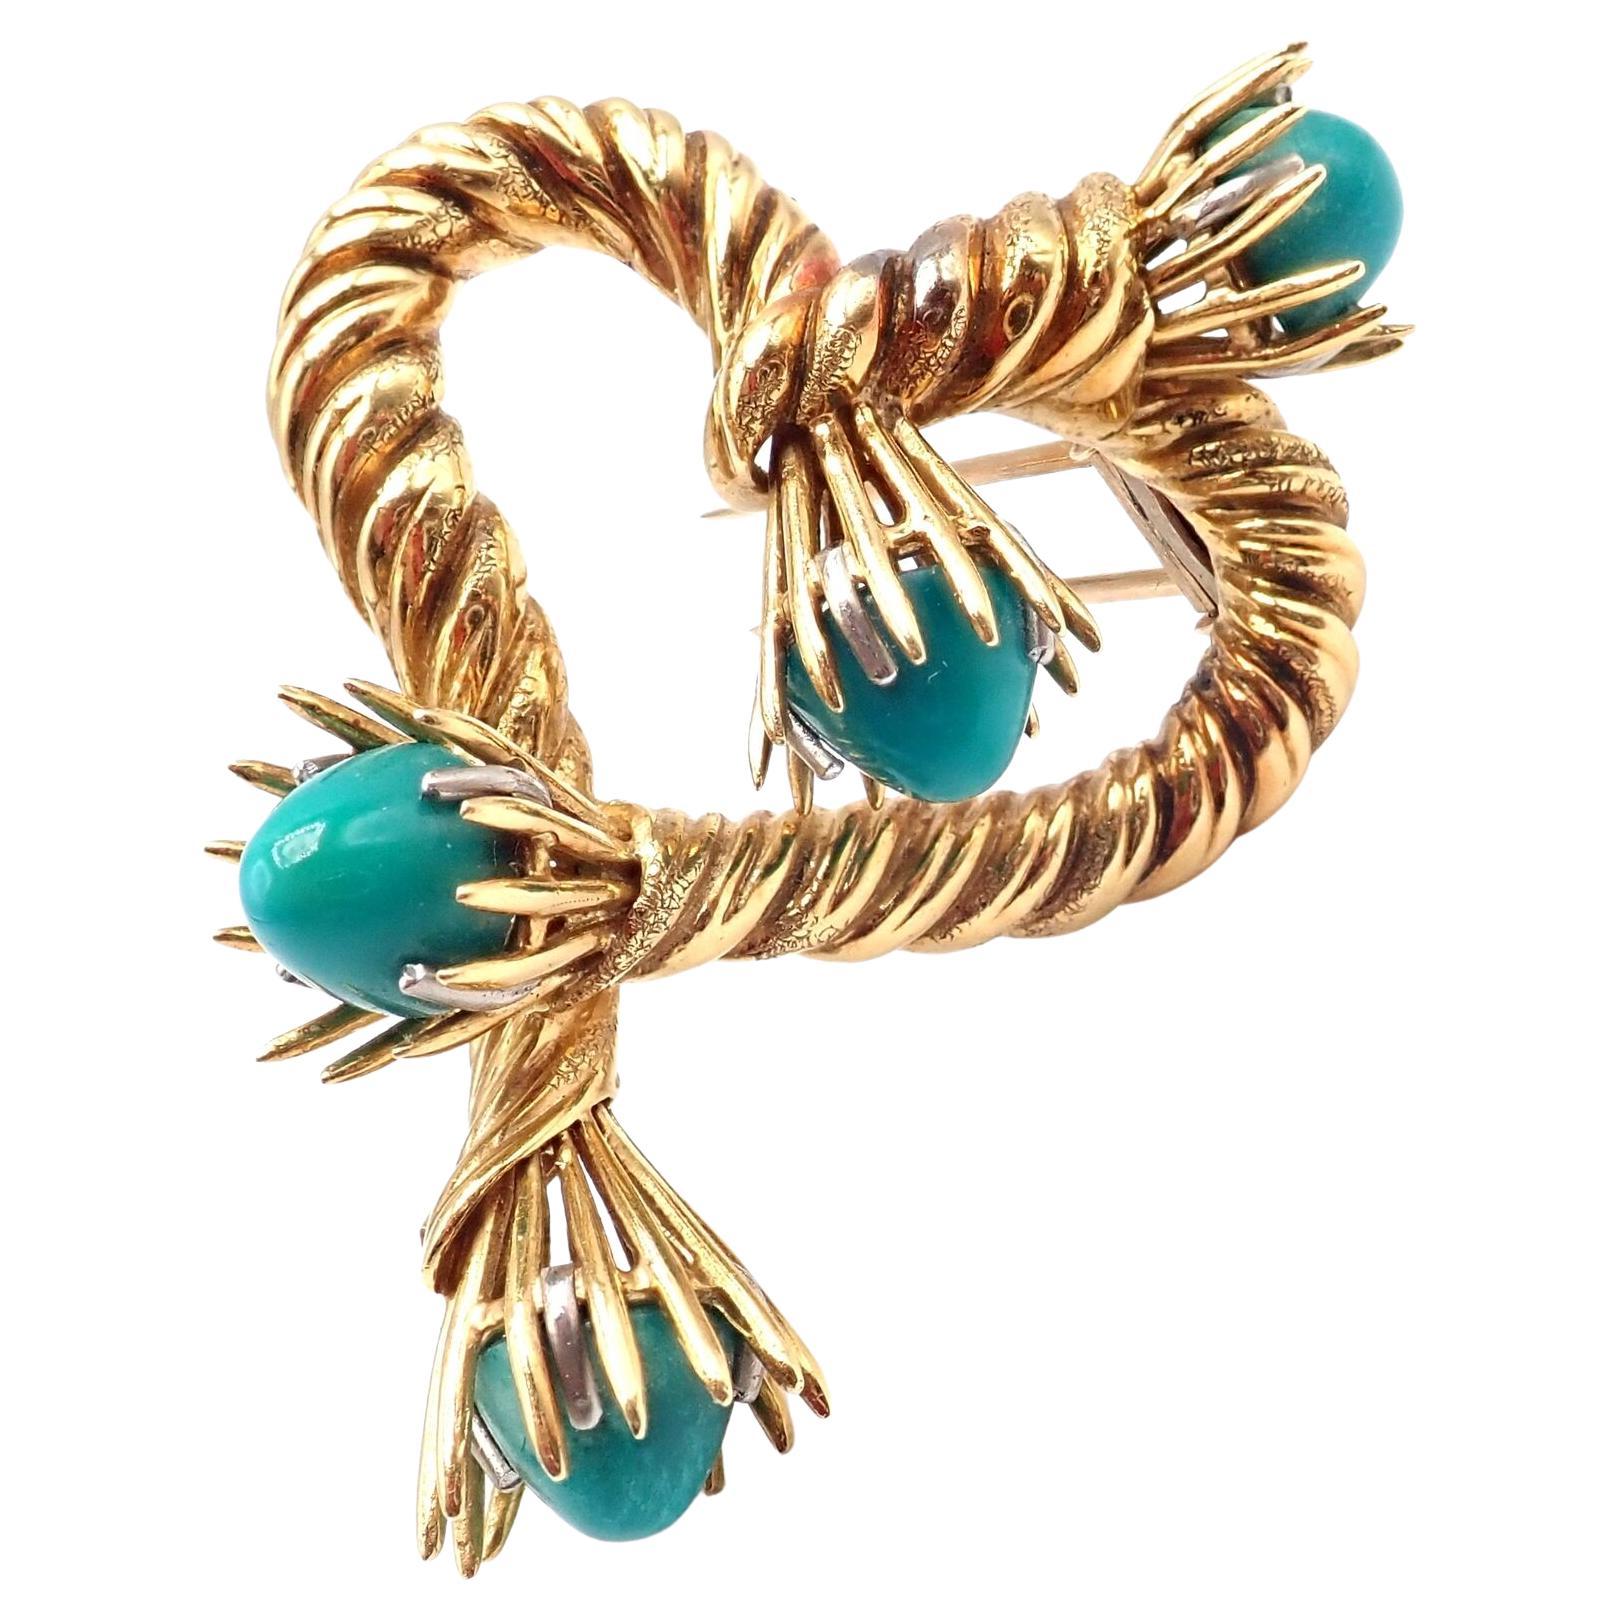 18k Yellow Gold Turquoise Heart Shape Brooch Pin by Jean Schlumberger for Tiffany & Co.
With 4 Large Turquoise beads
This brooch comes with original Tiffany & Co box.
Details:
Measurements: 53mm x 38mm
Weight: 25.4 grams
Stamped Hallmarks: Tiffany